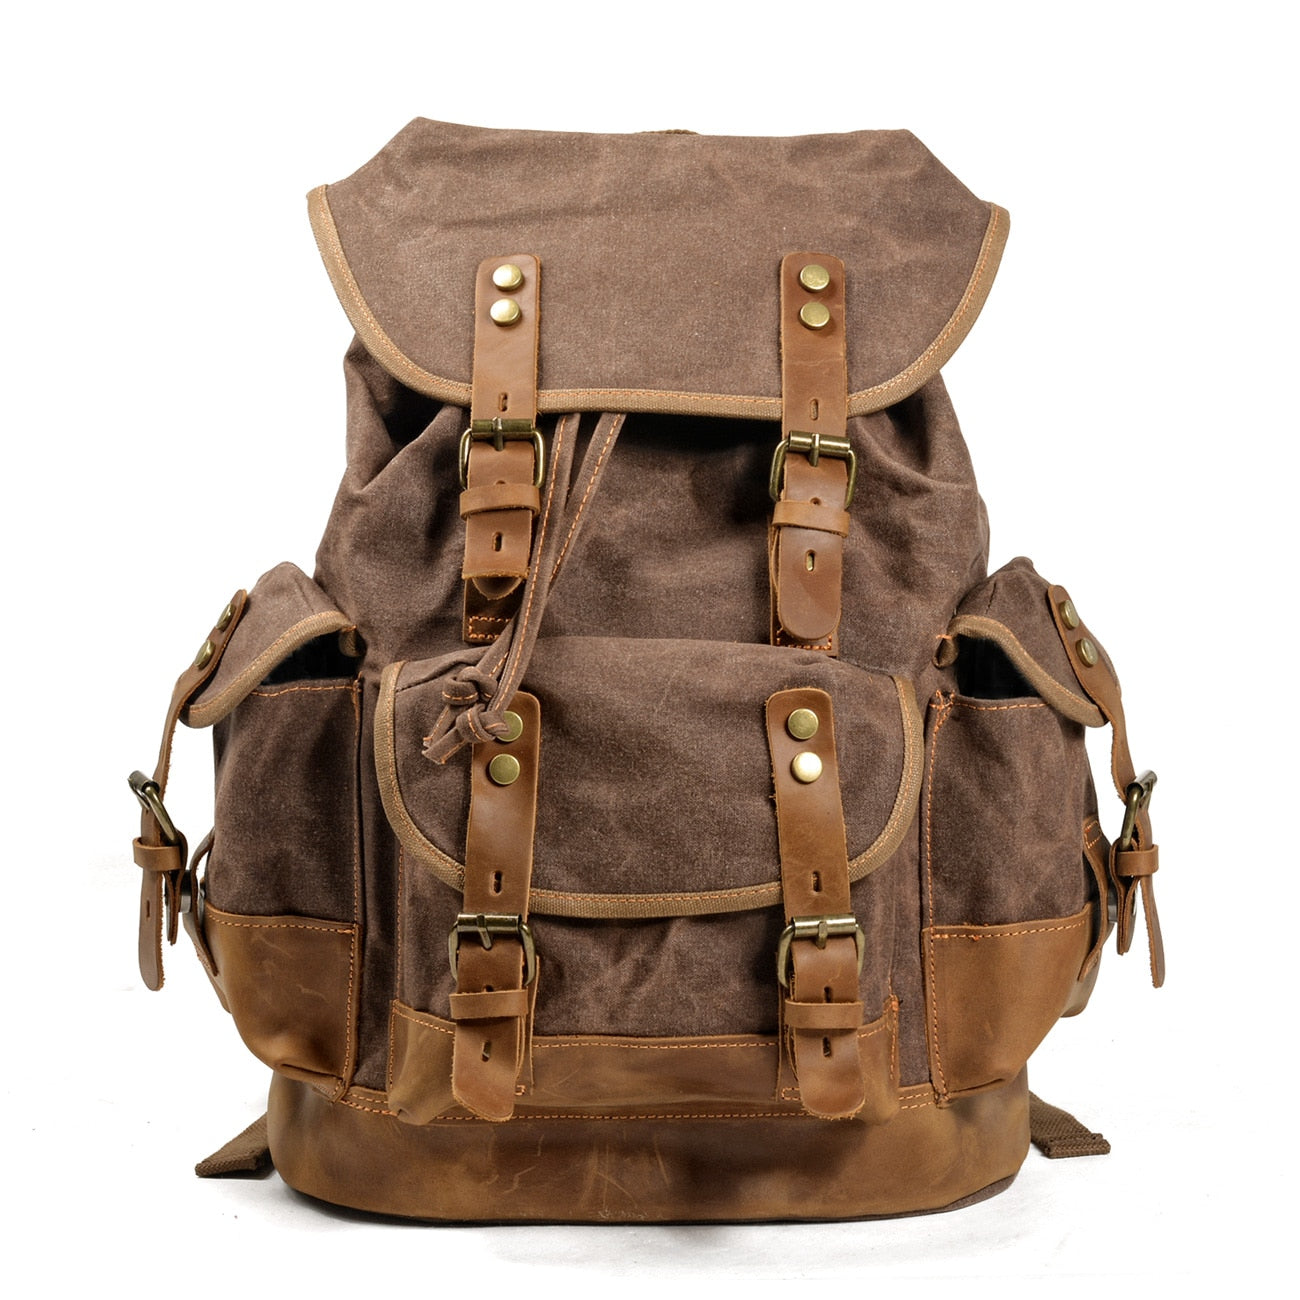 Vintage Backpack from Canvas & Cowhide for Hiking Camping - Light Brown Available at 2Fast2See.co